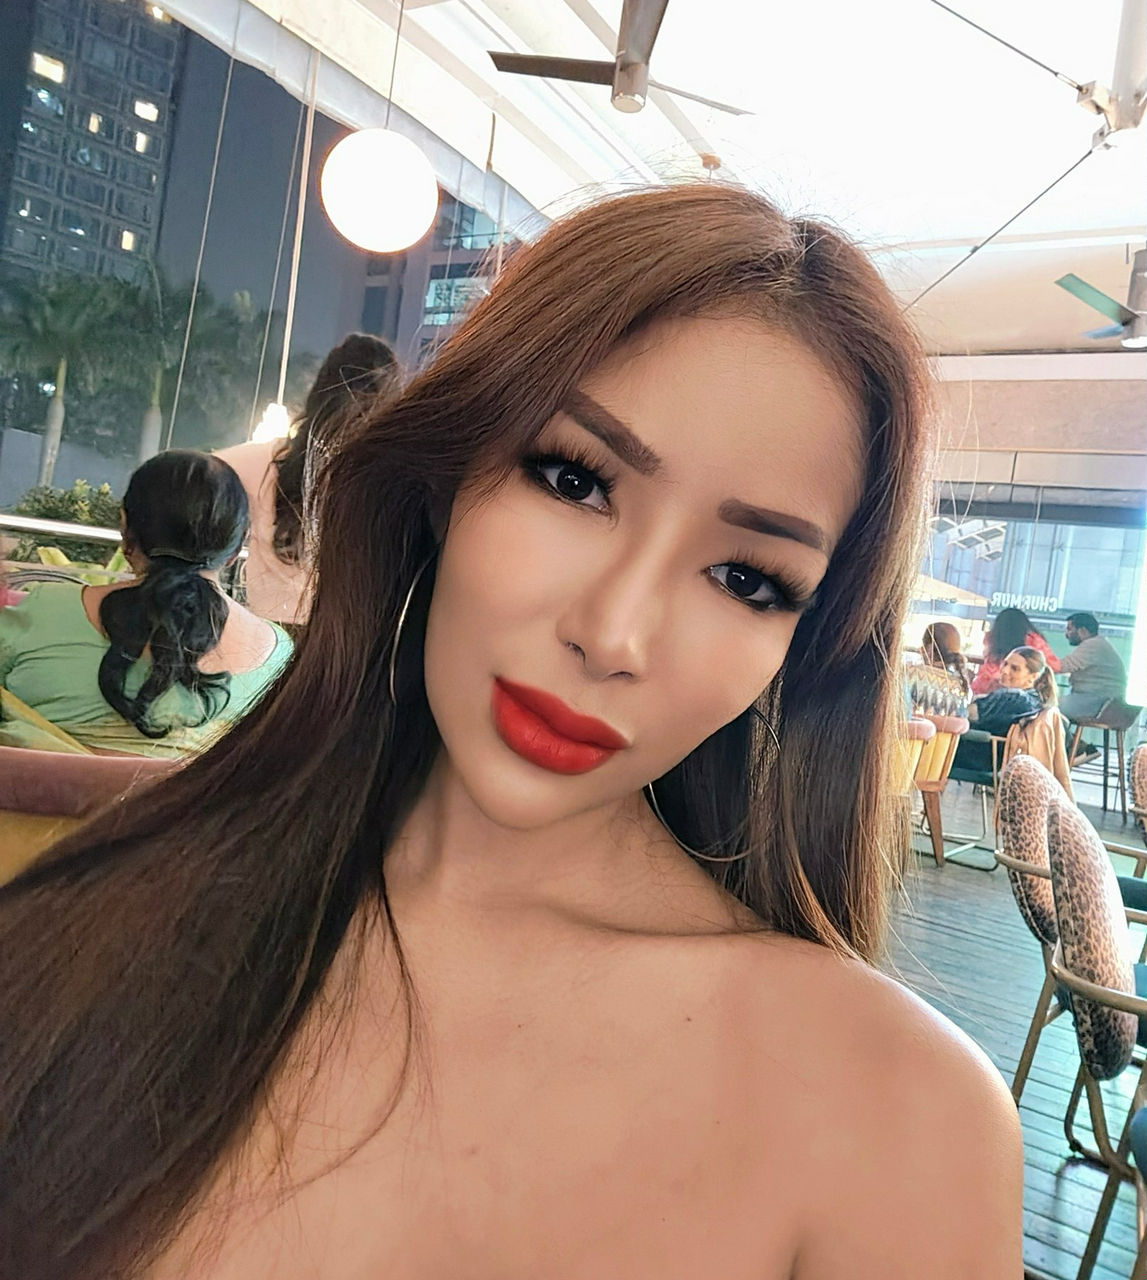 Escorts Davao City, Philippines For cam show only!